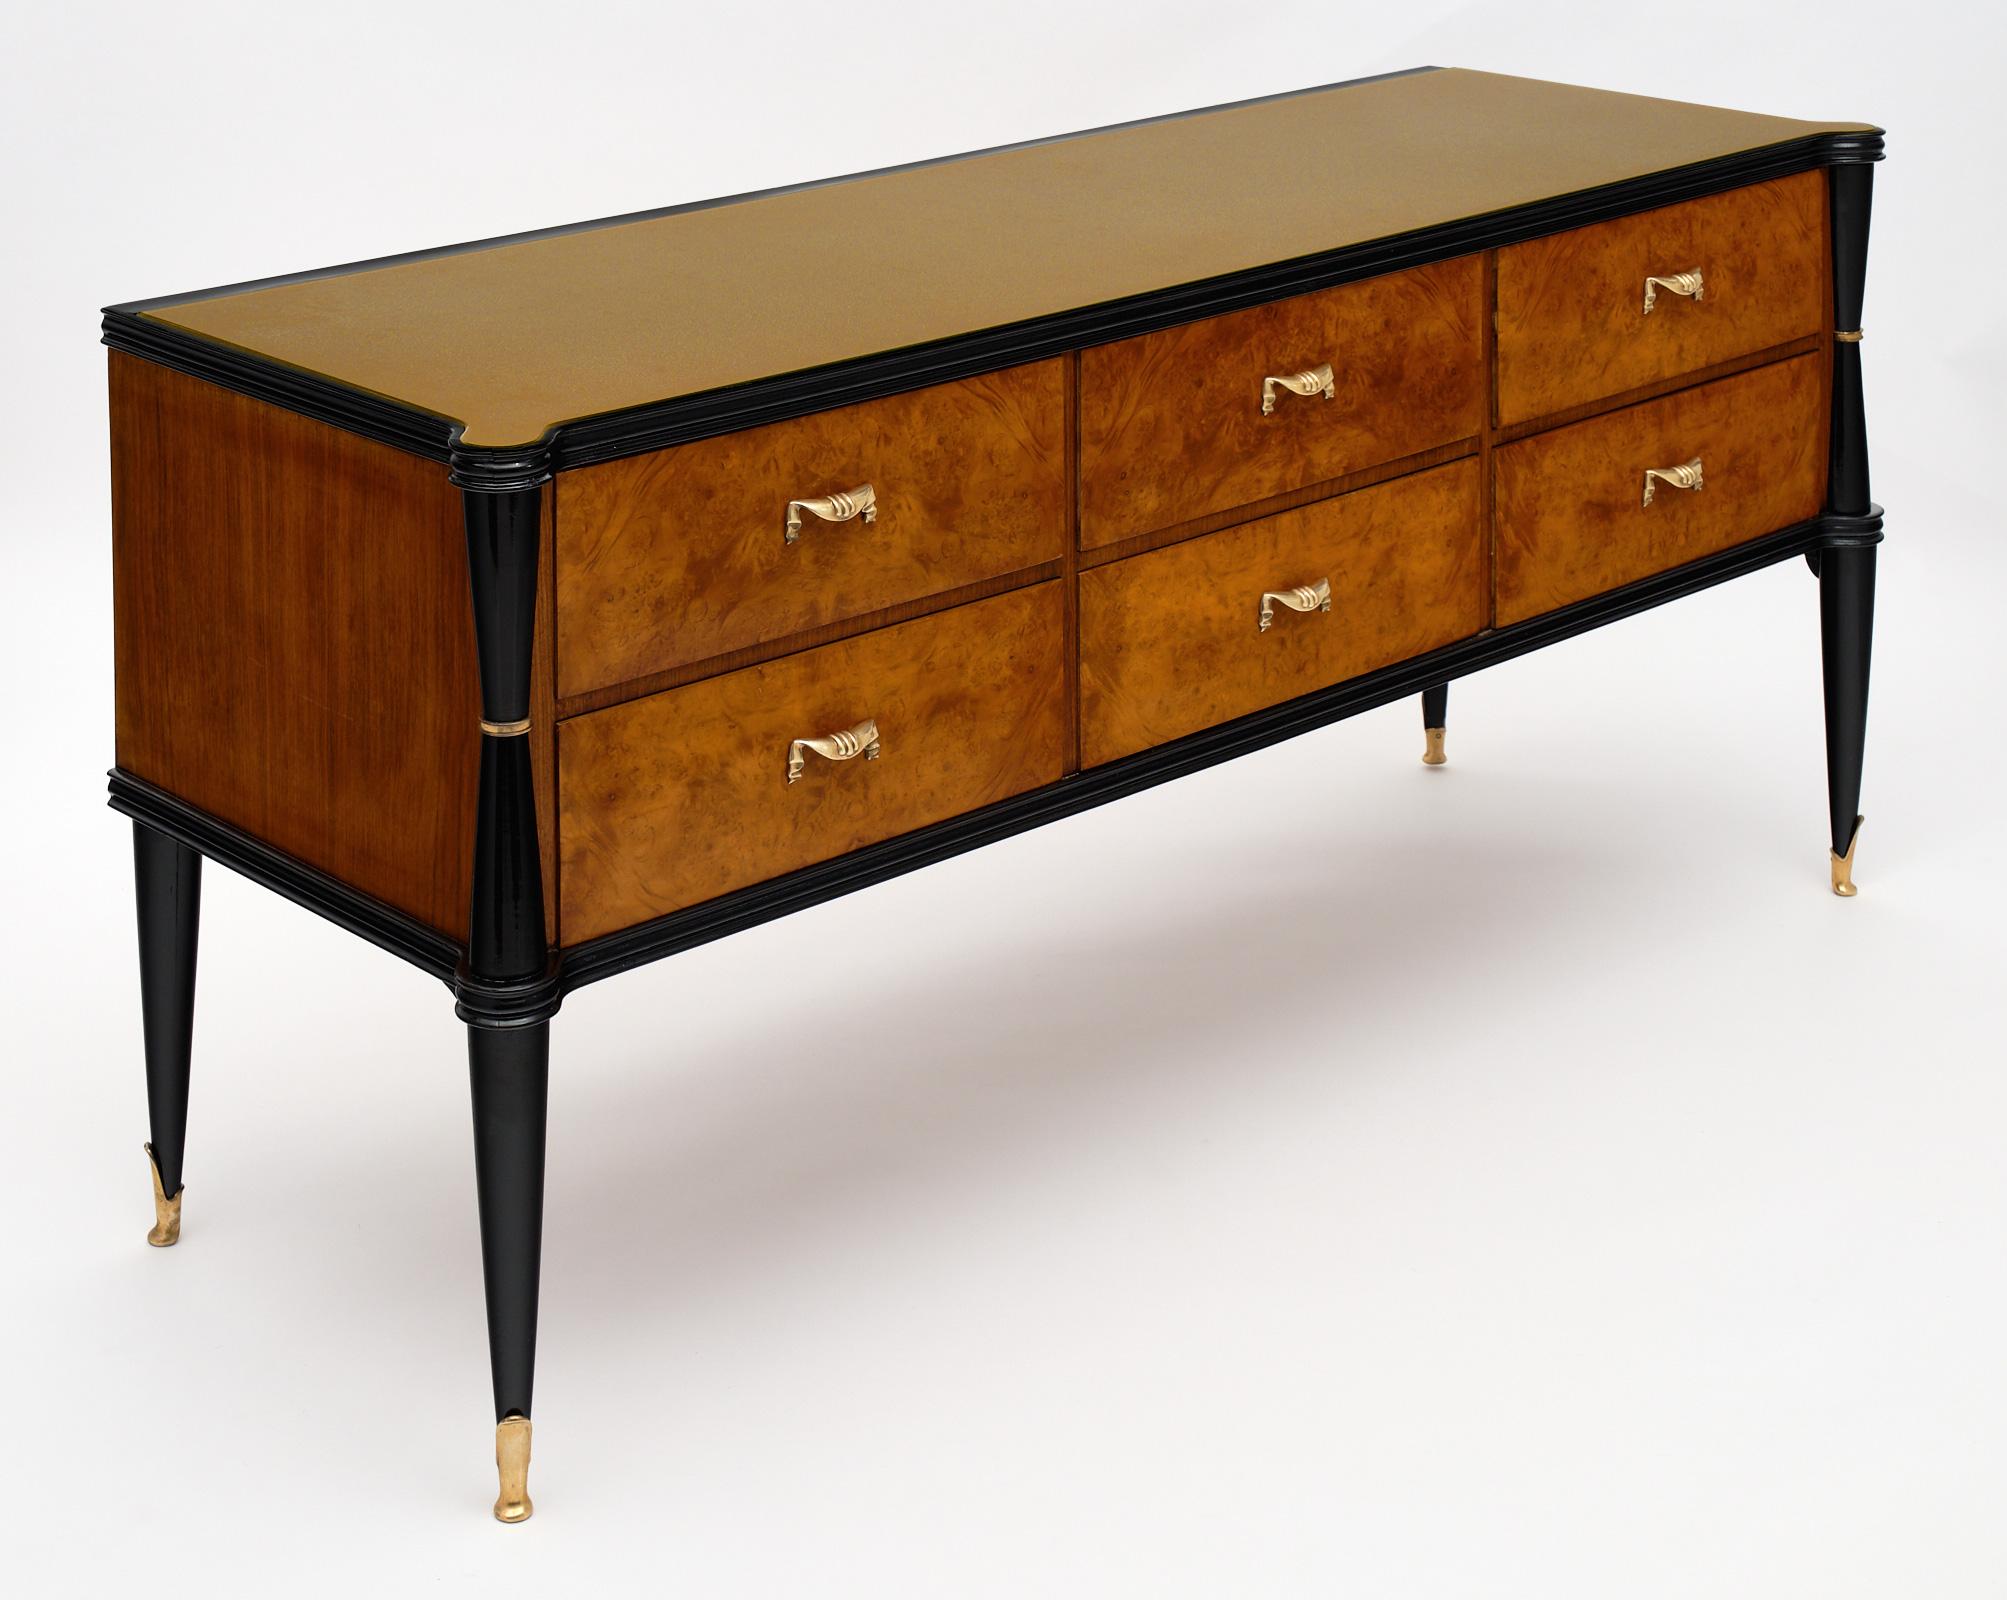 Italian burled walnut chest of drawers in a modernist style. We love the ebonized frame and warmth of this piece. The six dovetailed drawers featuring their originally case gilded bronze hardware and feet. We love the champagne colored glass on top